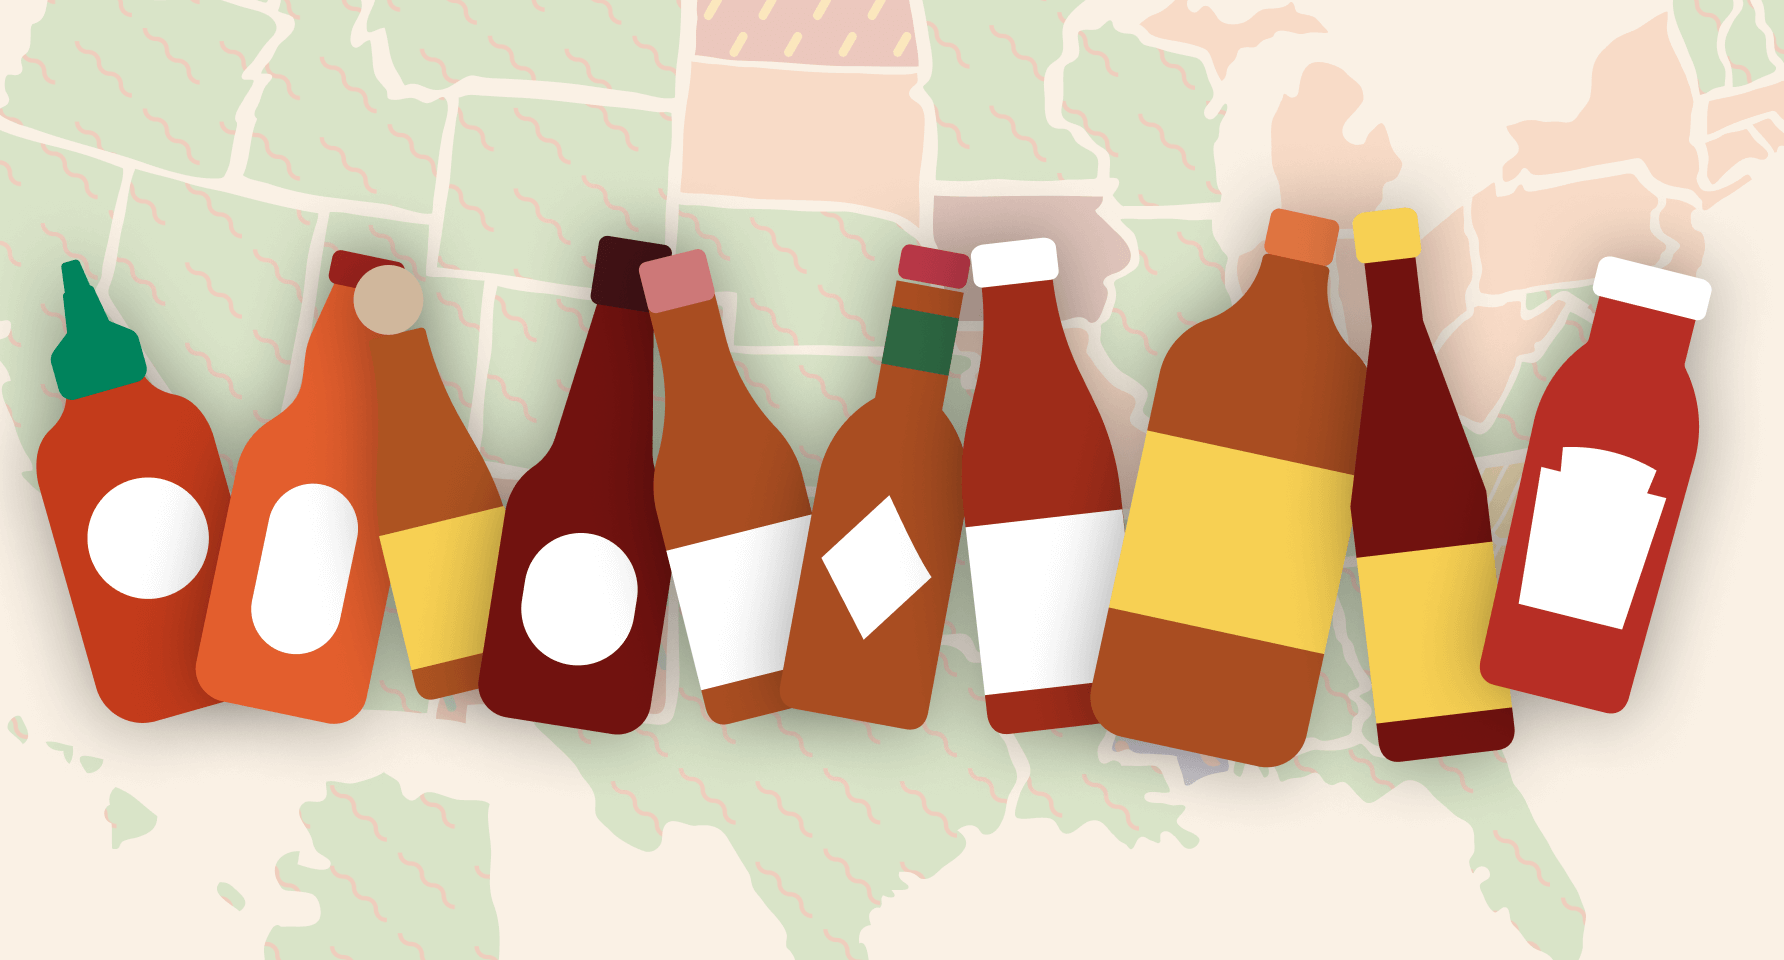 Red+Rooster+Louisiana+Hot+Sauce+-+6+Oz for sale online